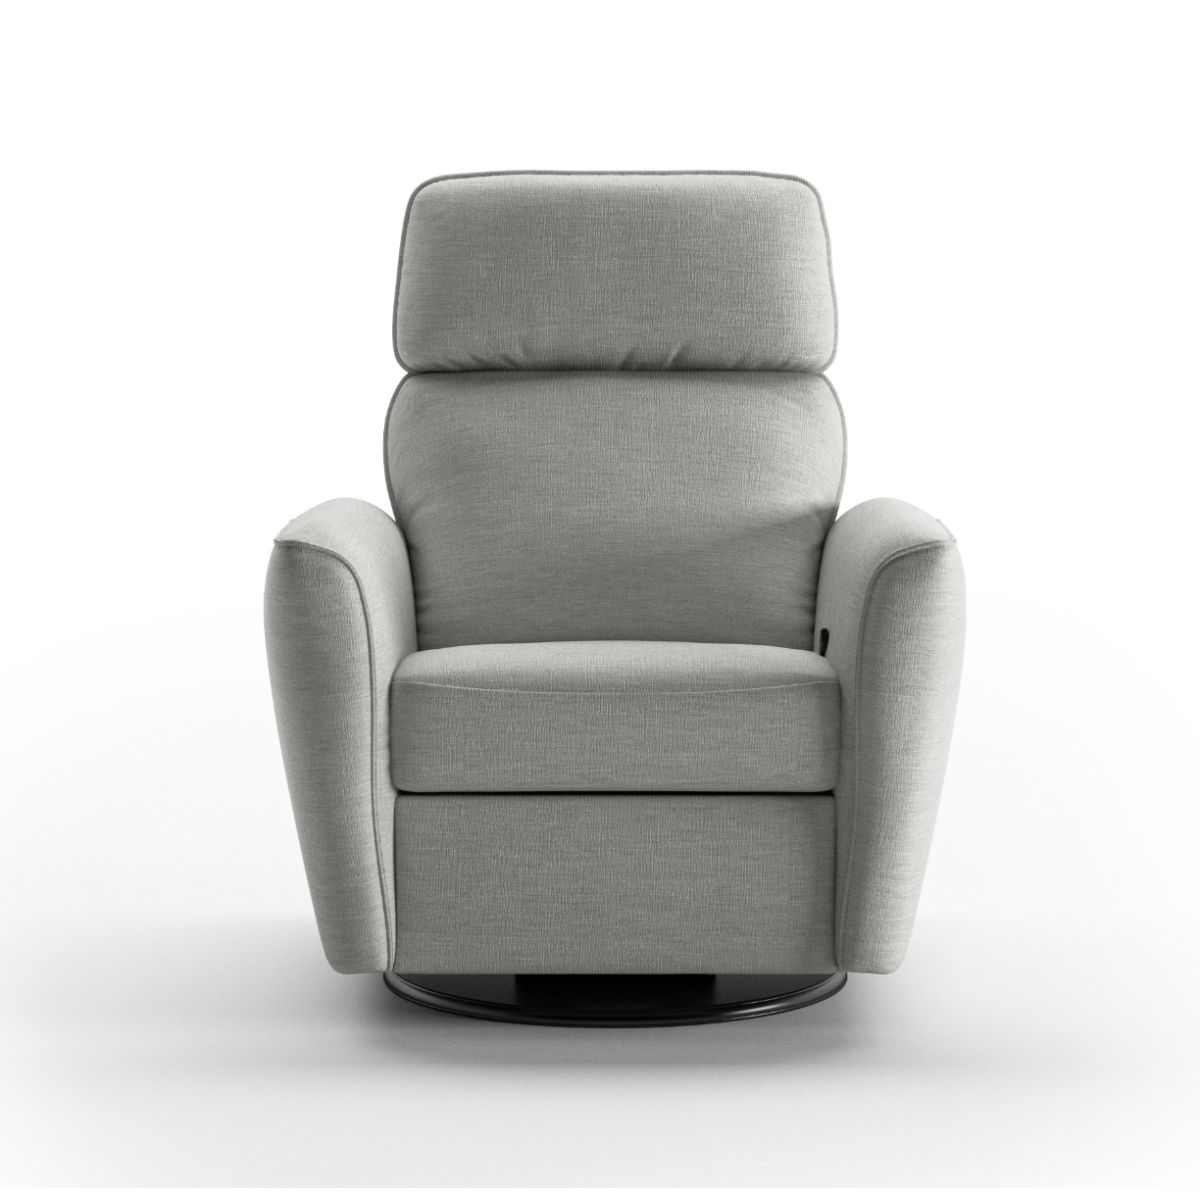 Luonto Furniture Welted Recliner - Manual - Oliver 173